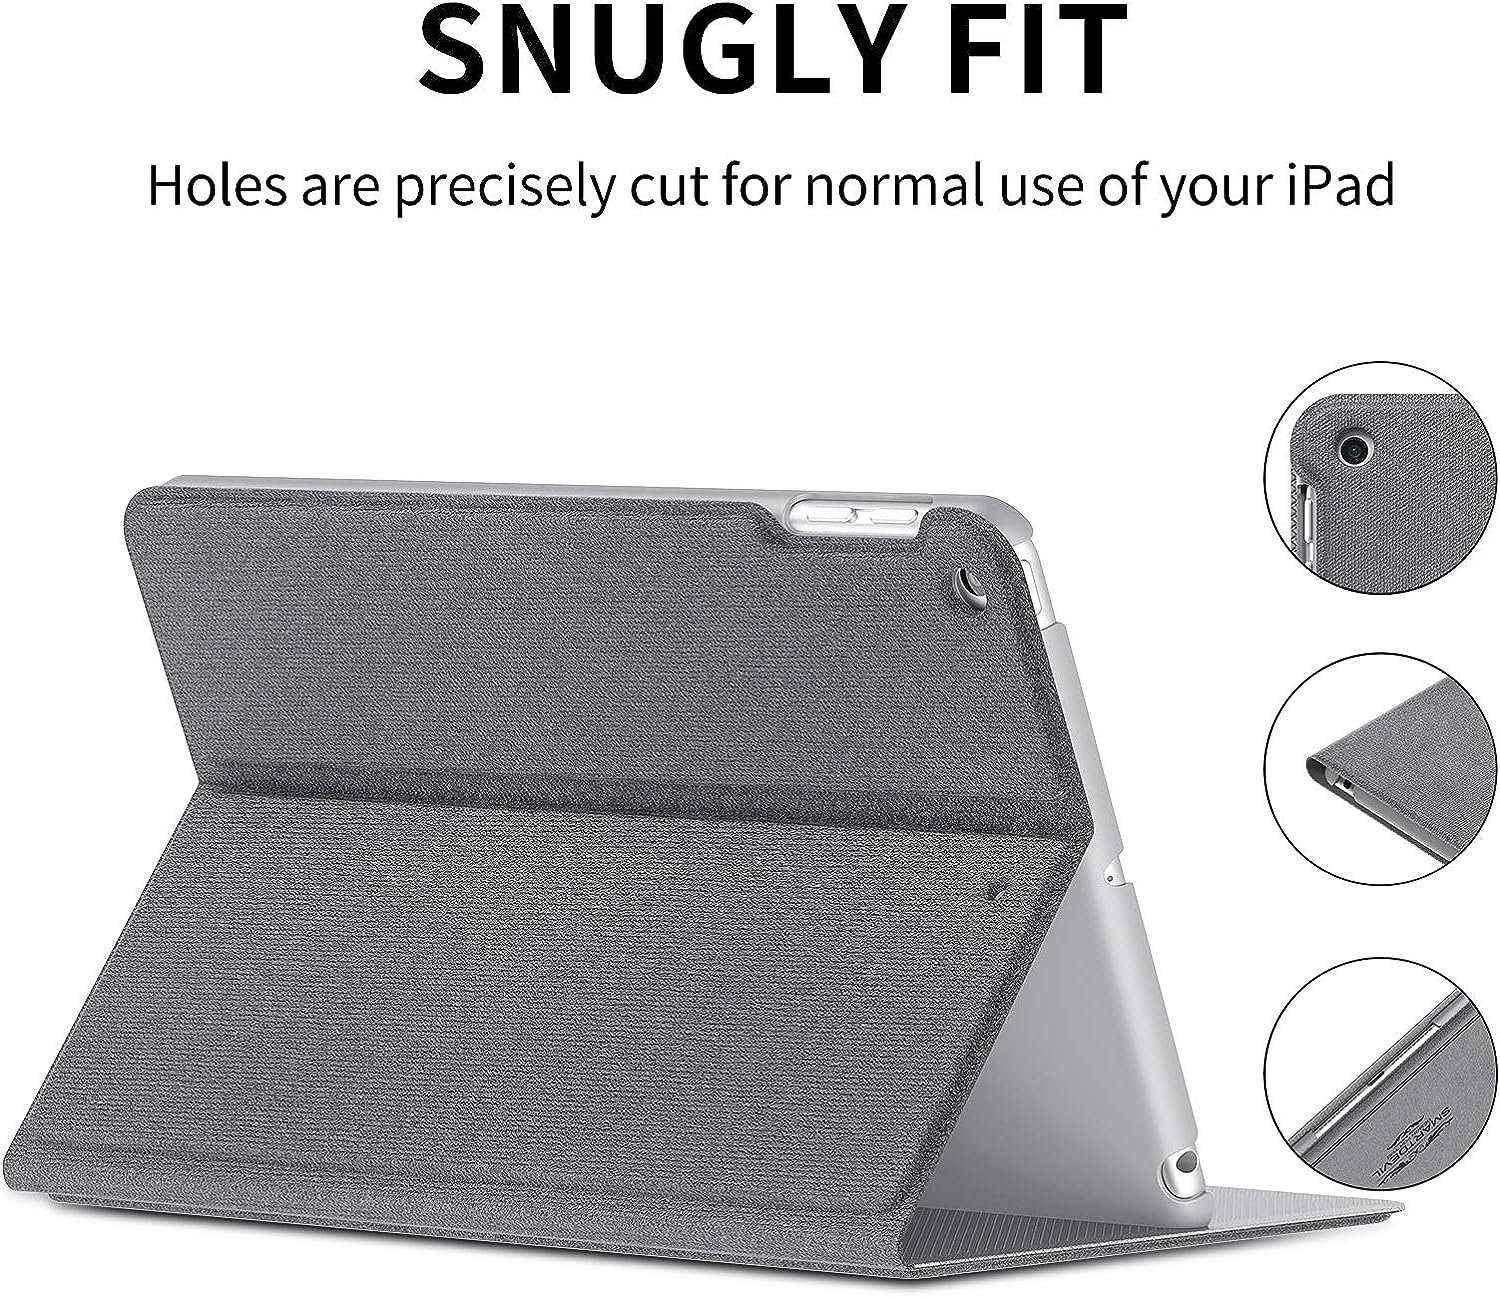 SmartDevil Case for iPad mini 3 / Case for iPad mini 2 / Case for iPad mini 1 in Retro Style, Shockproof Slim 7.9 Inch Case for iPad mini 3 2 1 with Auto Sleep/Wake and Stand Function - Grey